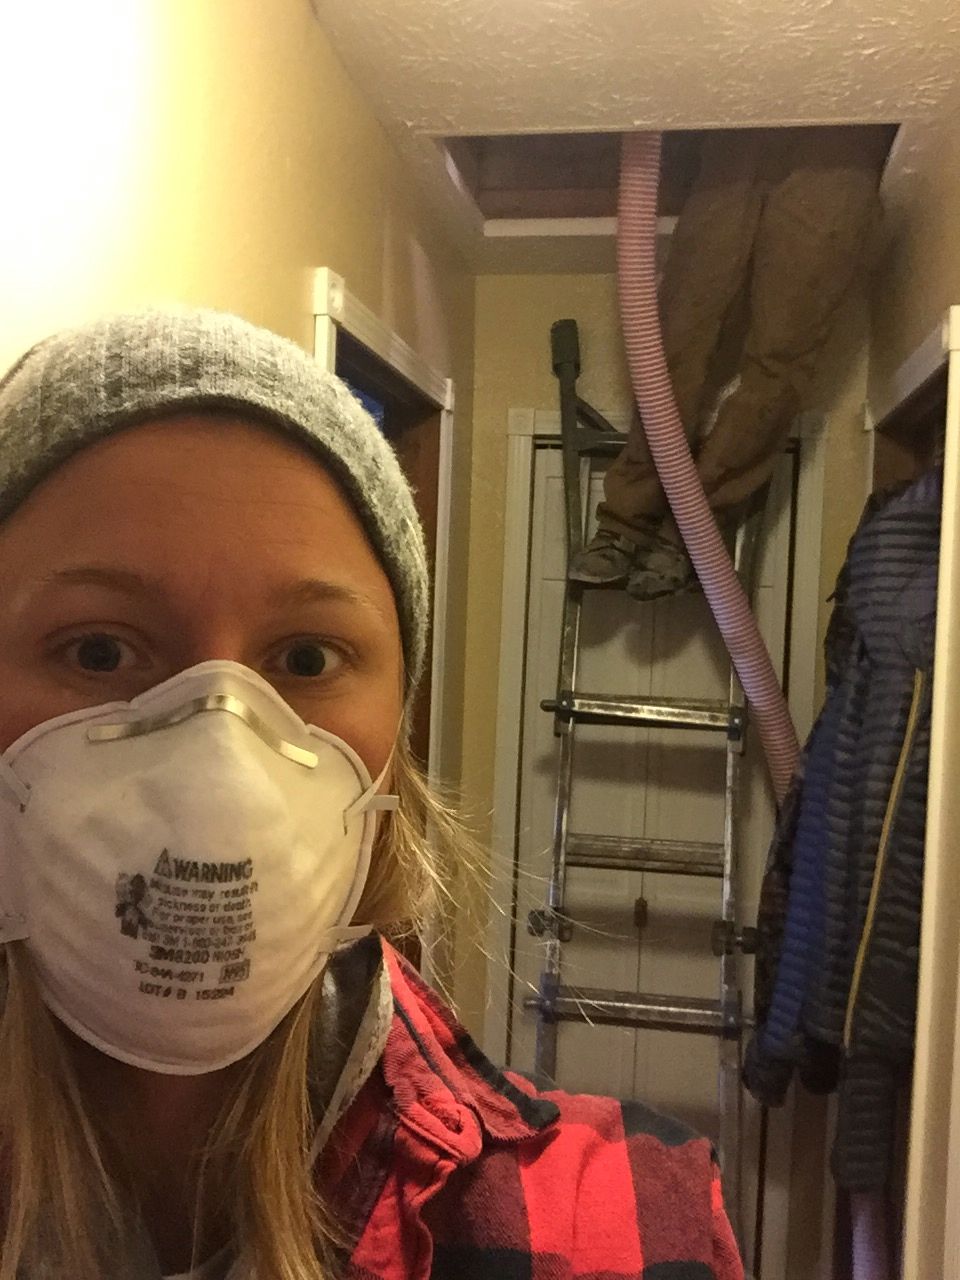  Insulating our house a bit more, now that it is so cold out! Keeping this place cozy. 